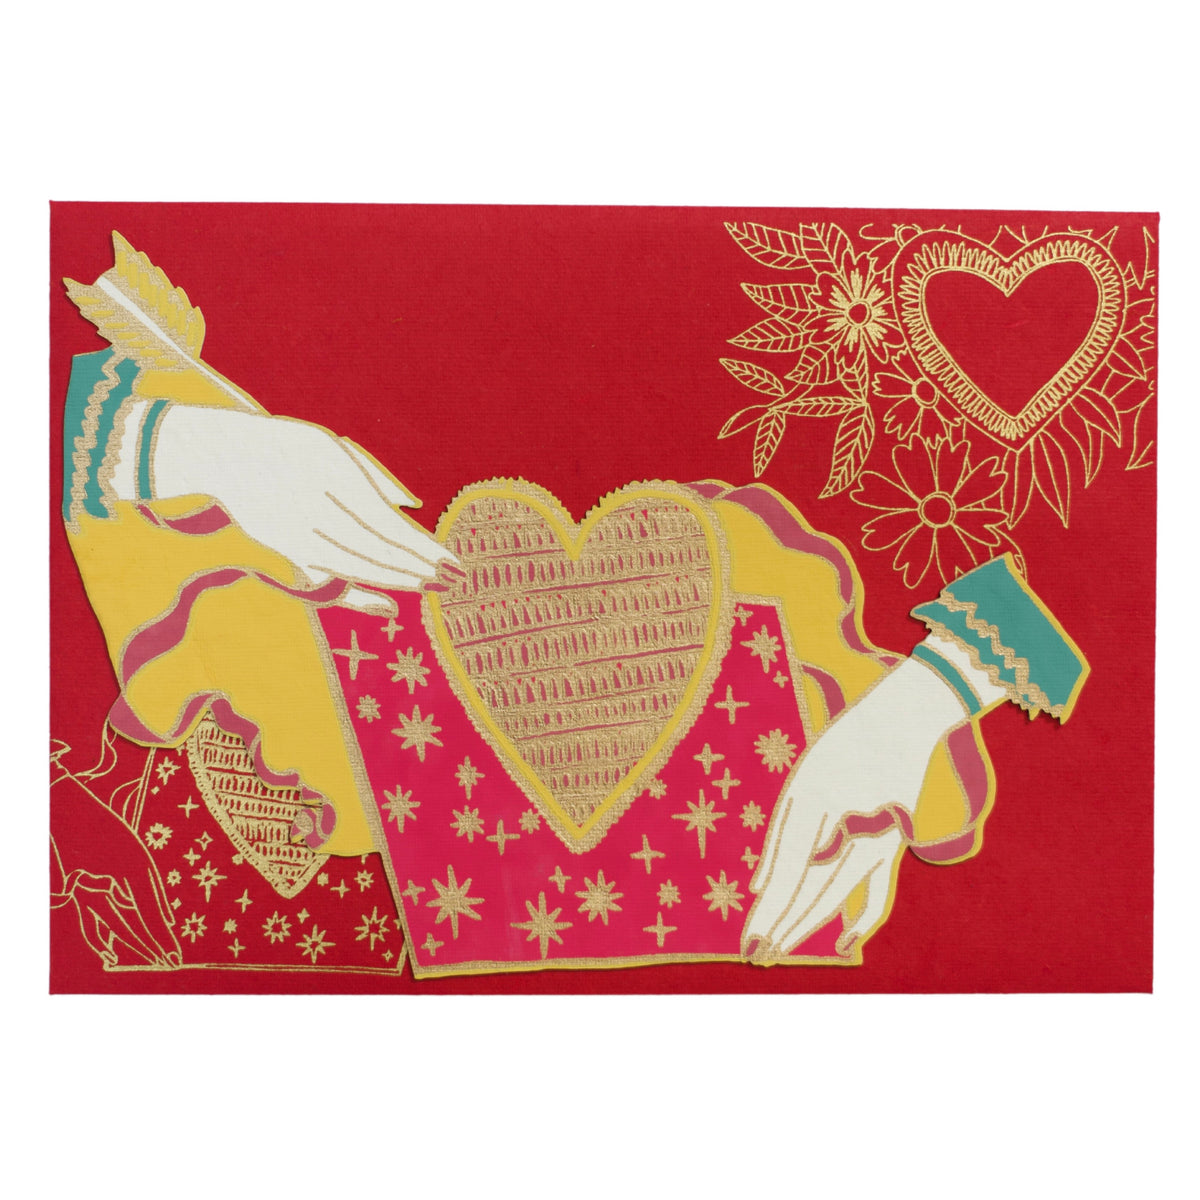 East End Press Heart and Hands Greeting Card